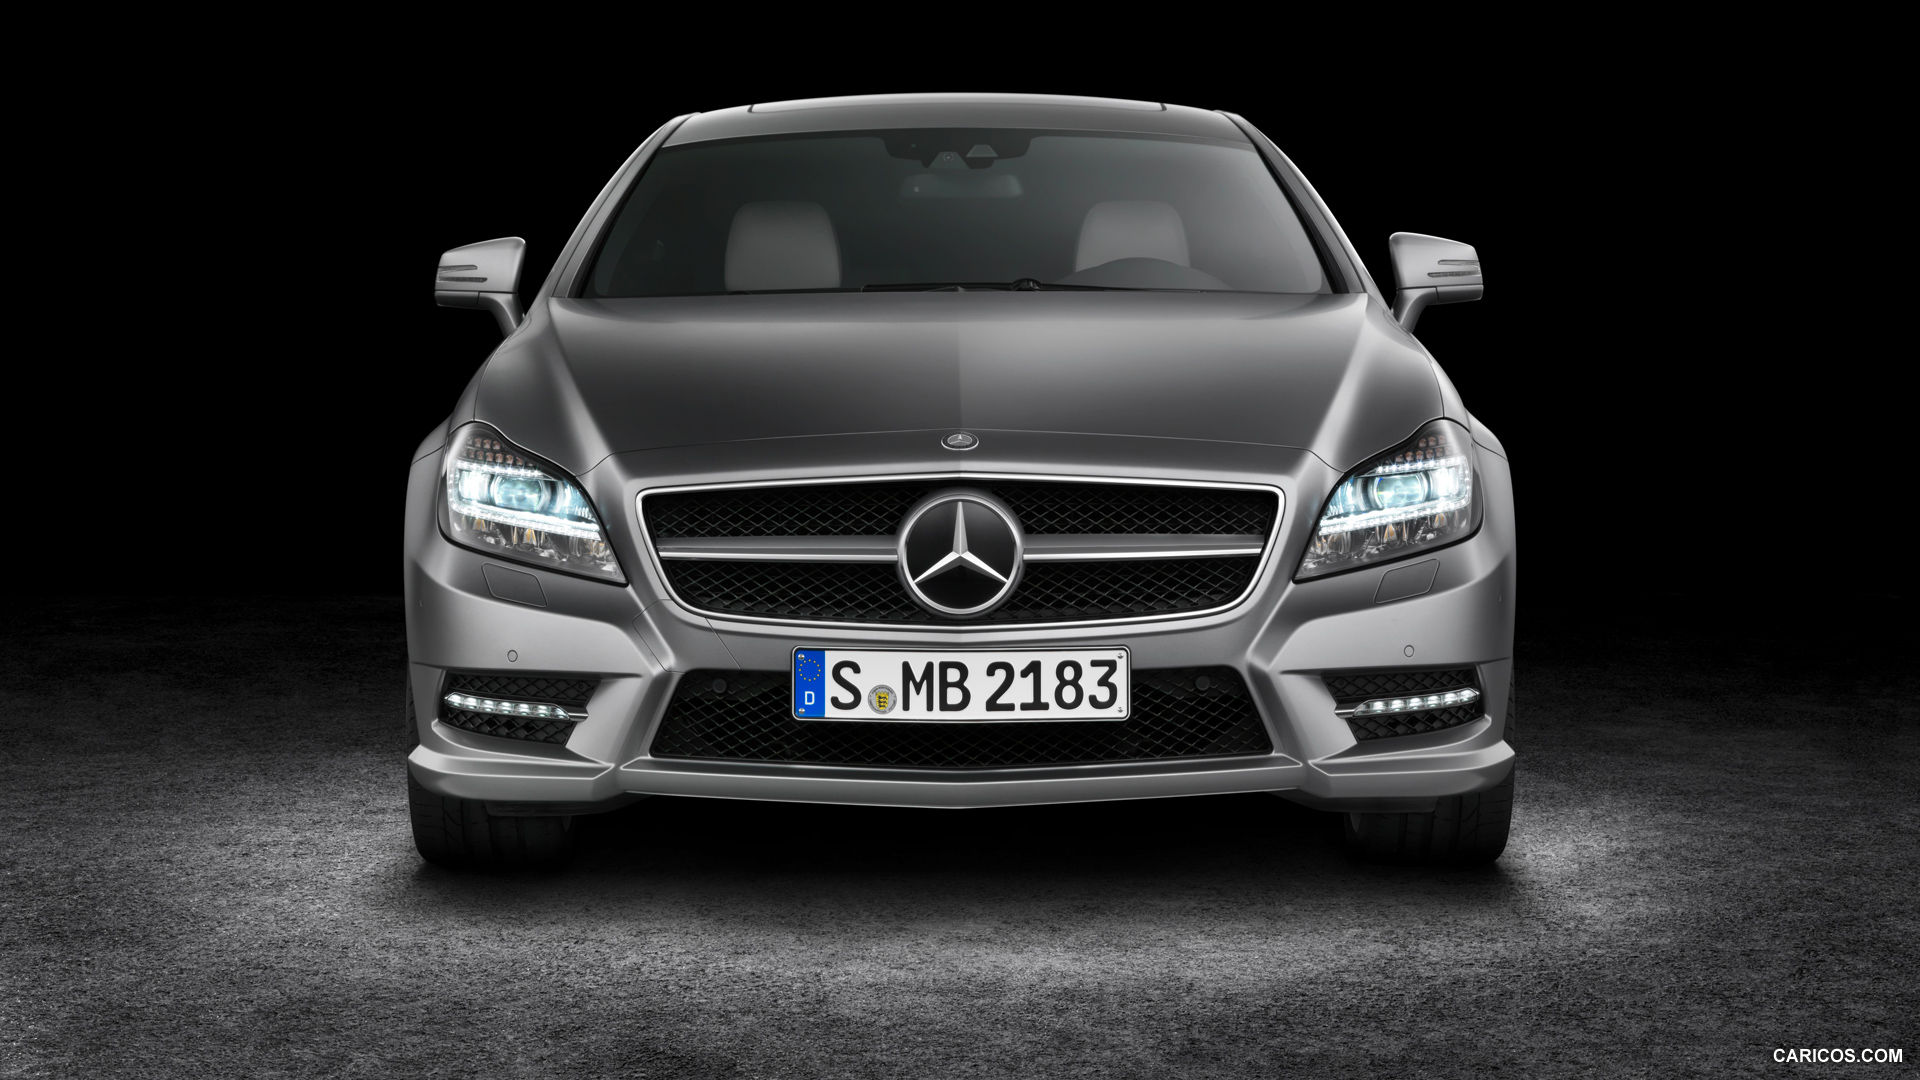 2013 Mercedes-Benz CLS 500 Shooting Brake - Front, #122 of 184